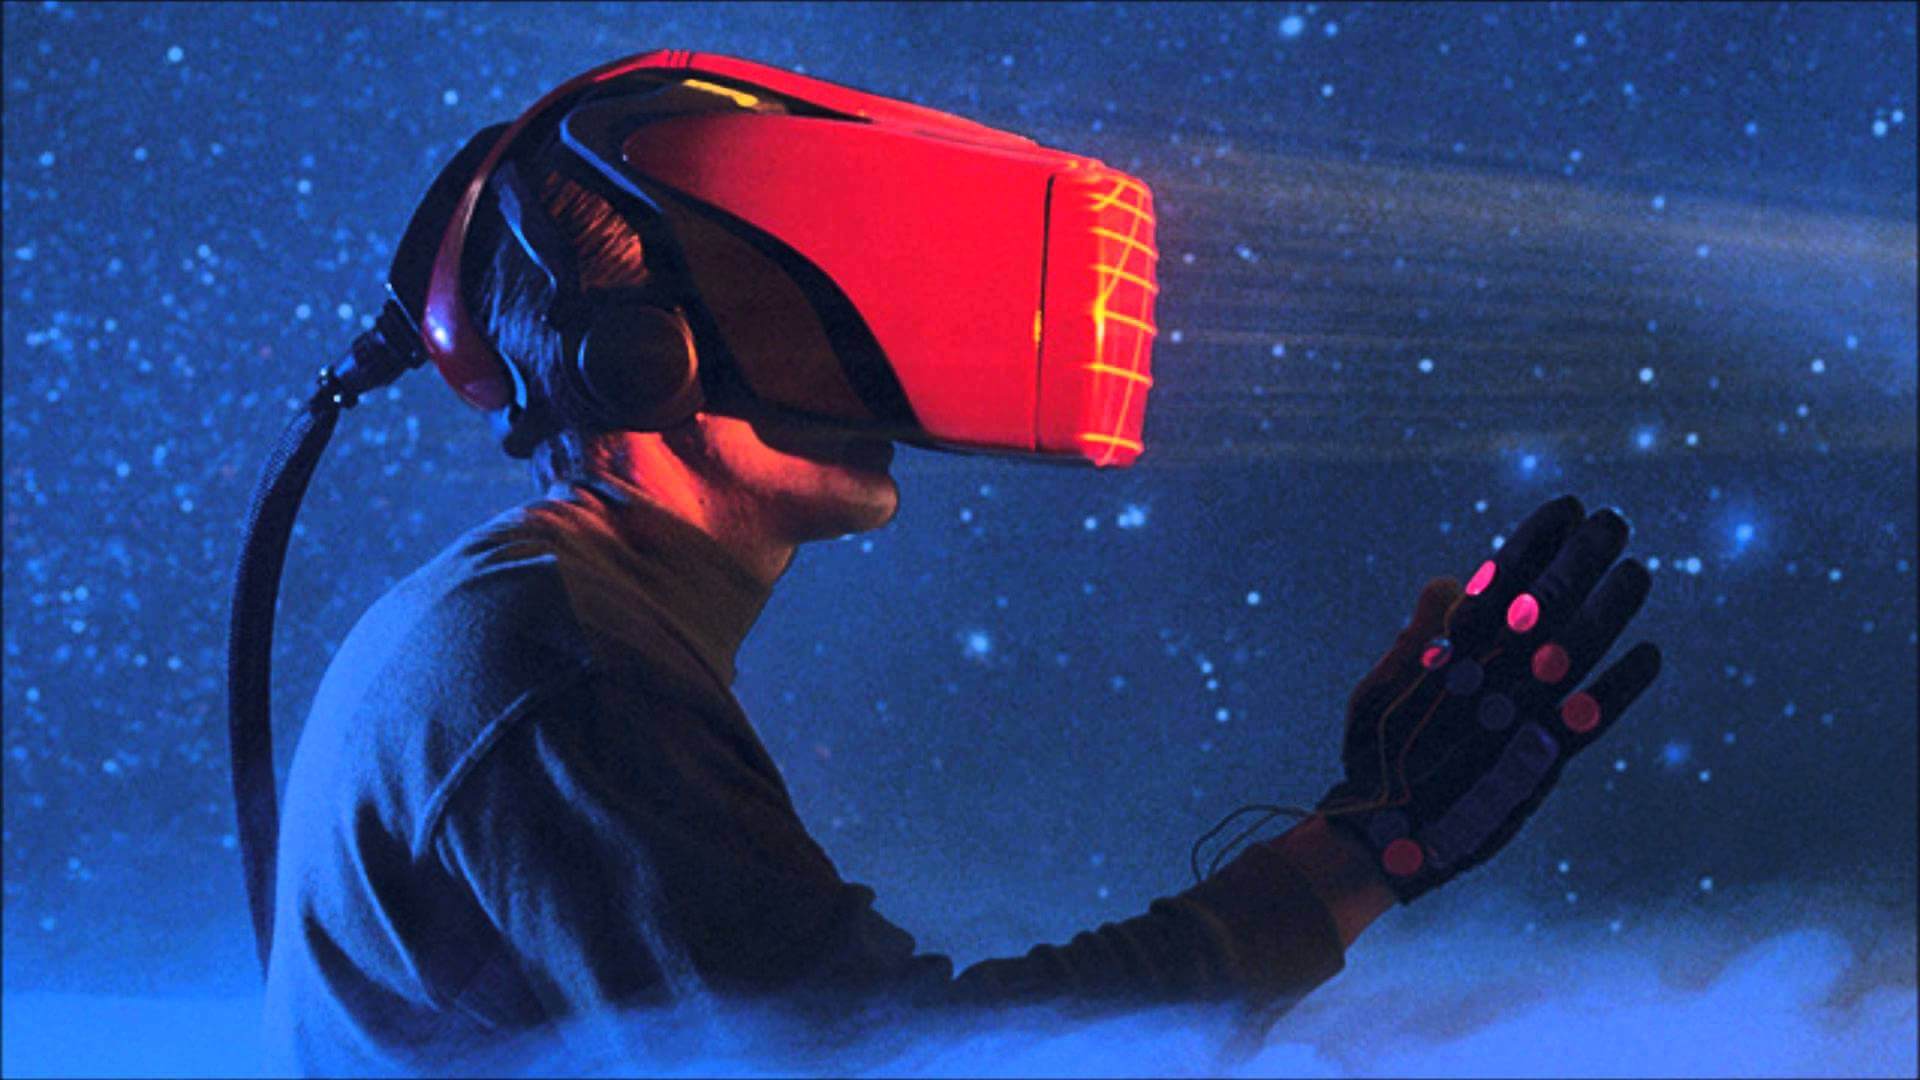 vr headsets